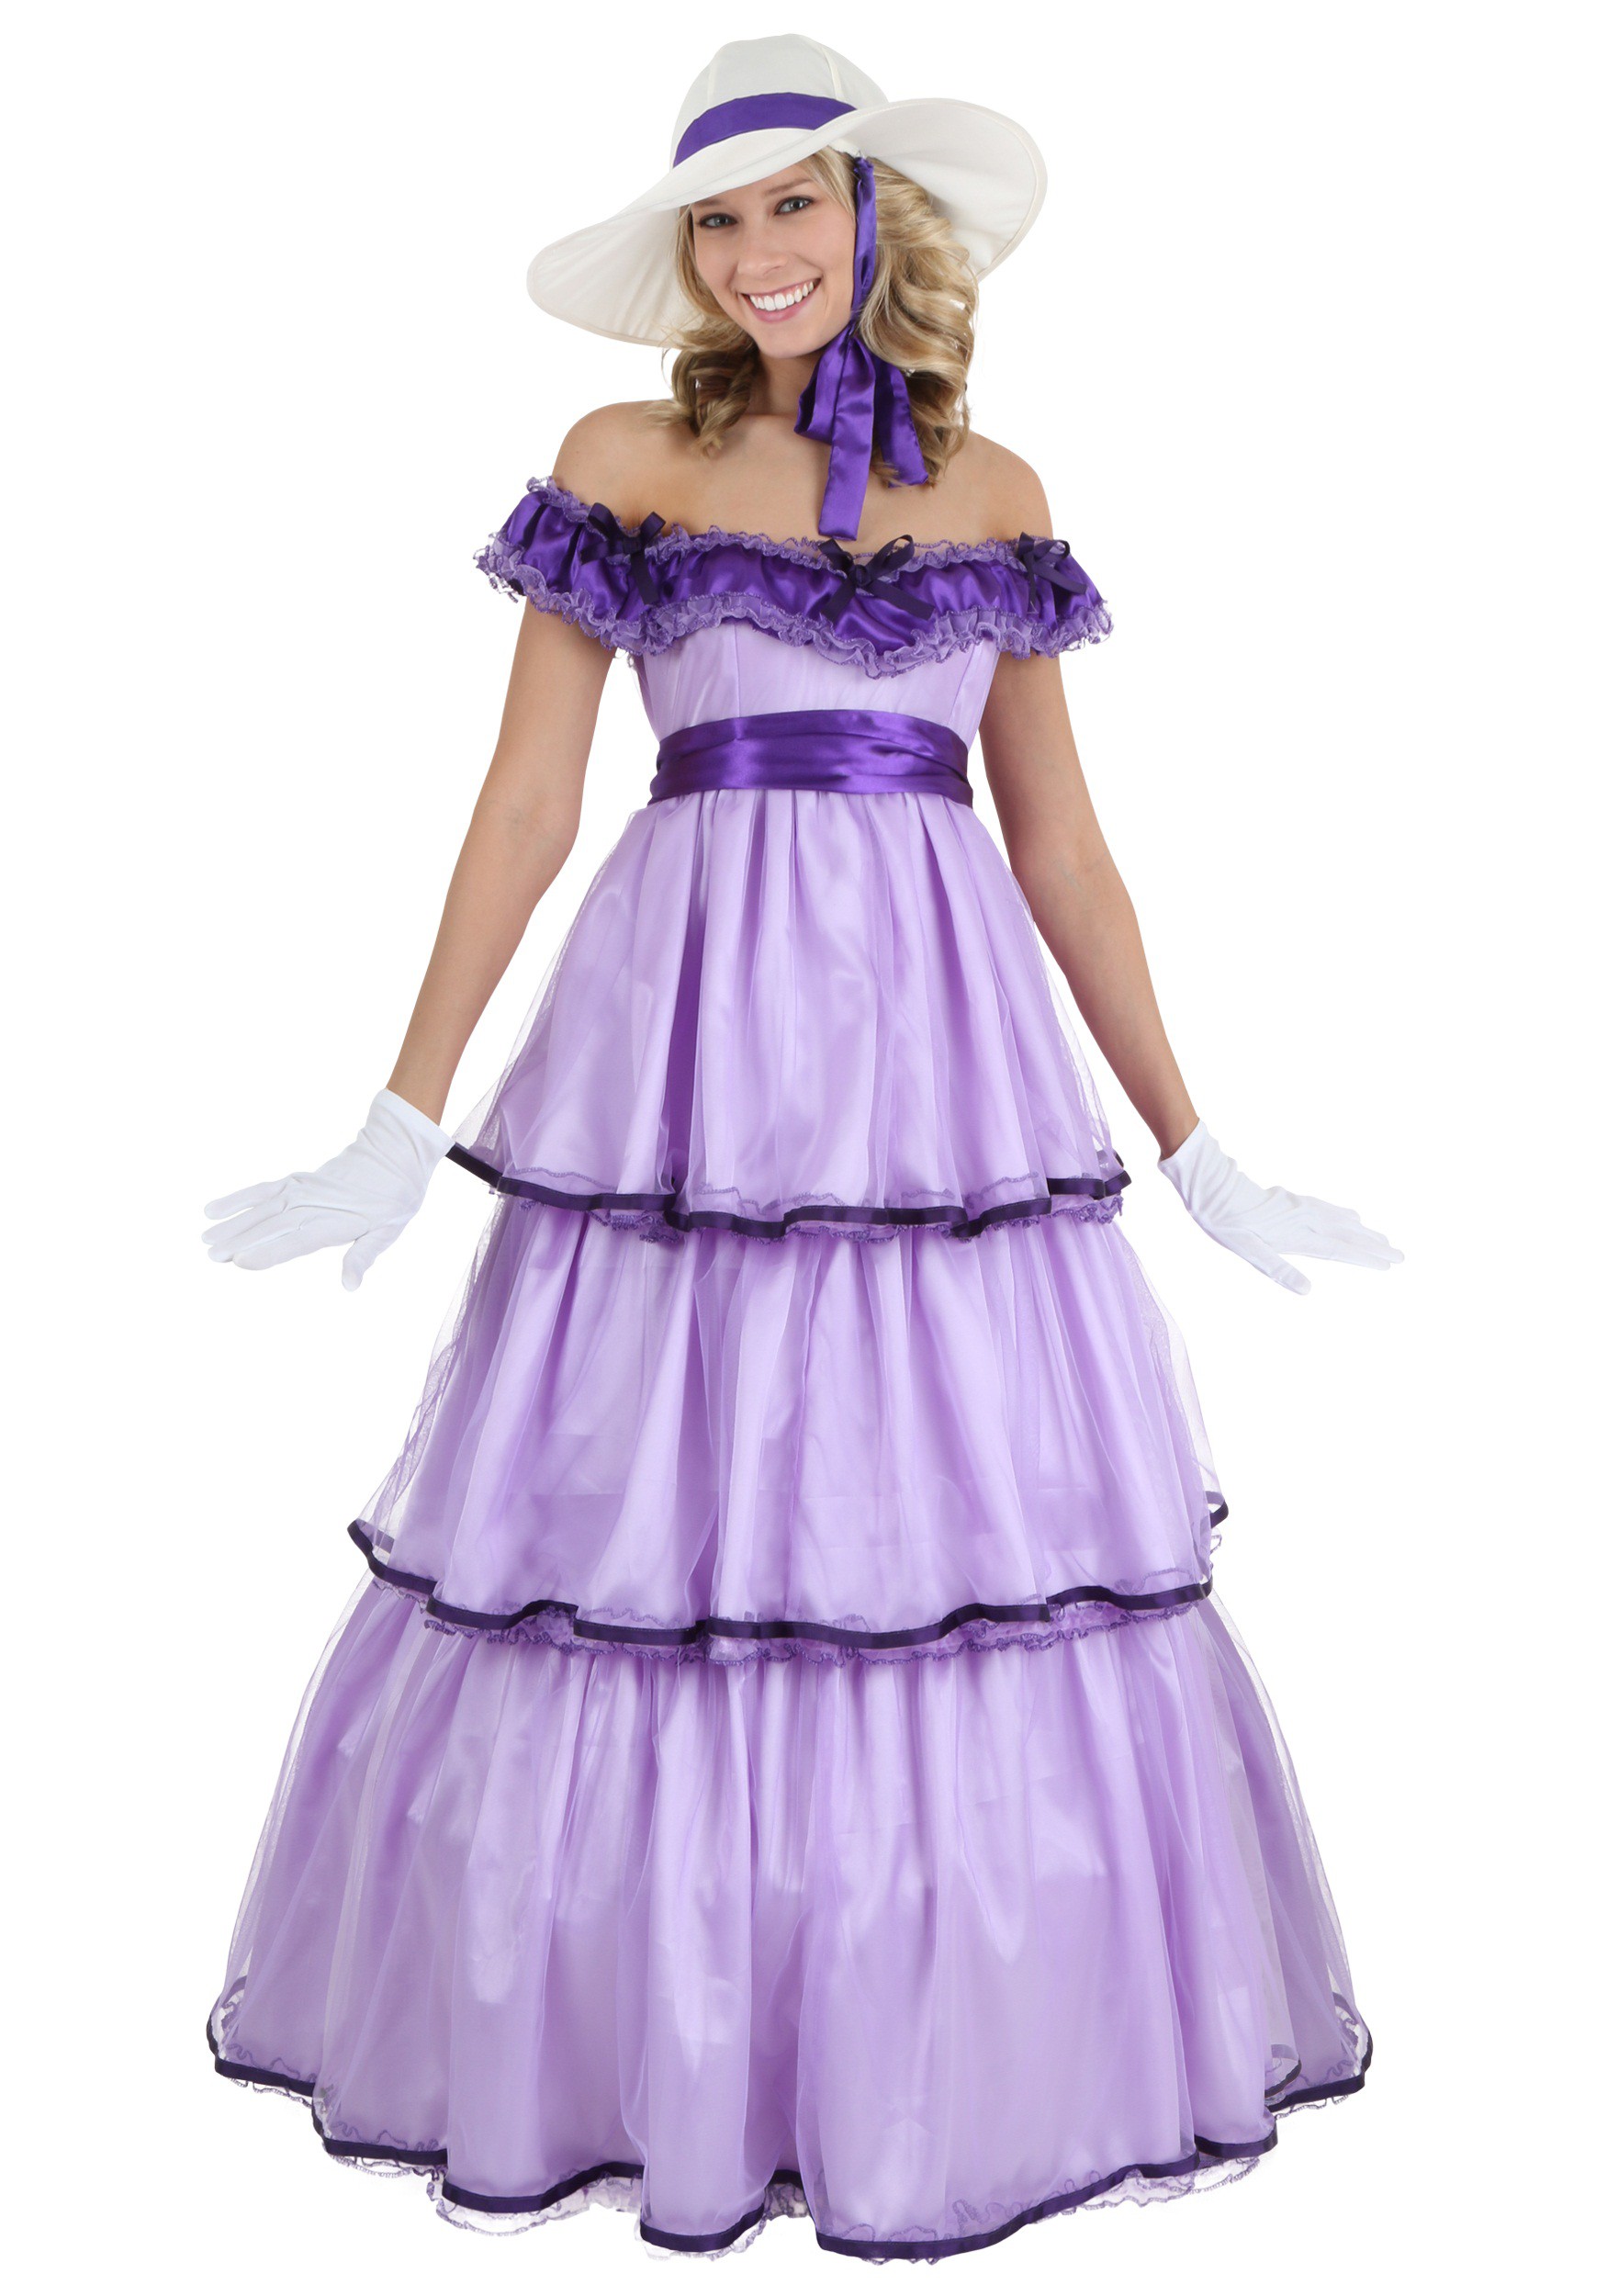 Photos - Fancy Dress Deluxe FUN Costumes Adult  Southern Belle  Costume Purple 